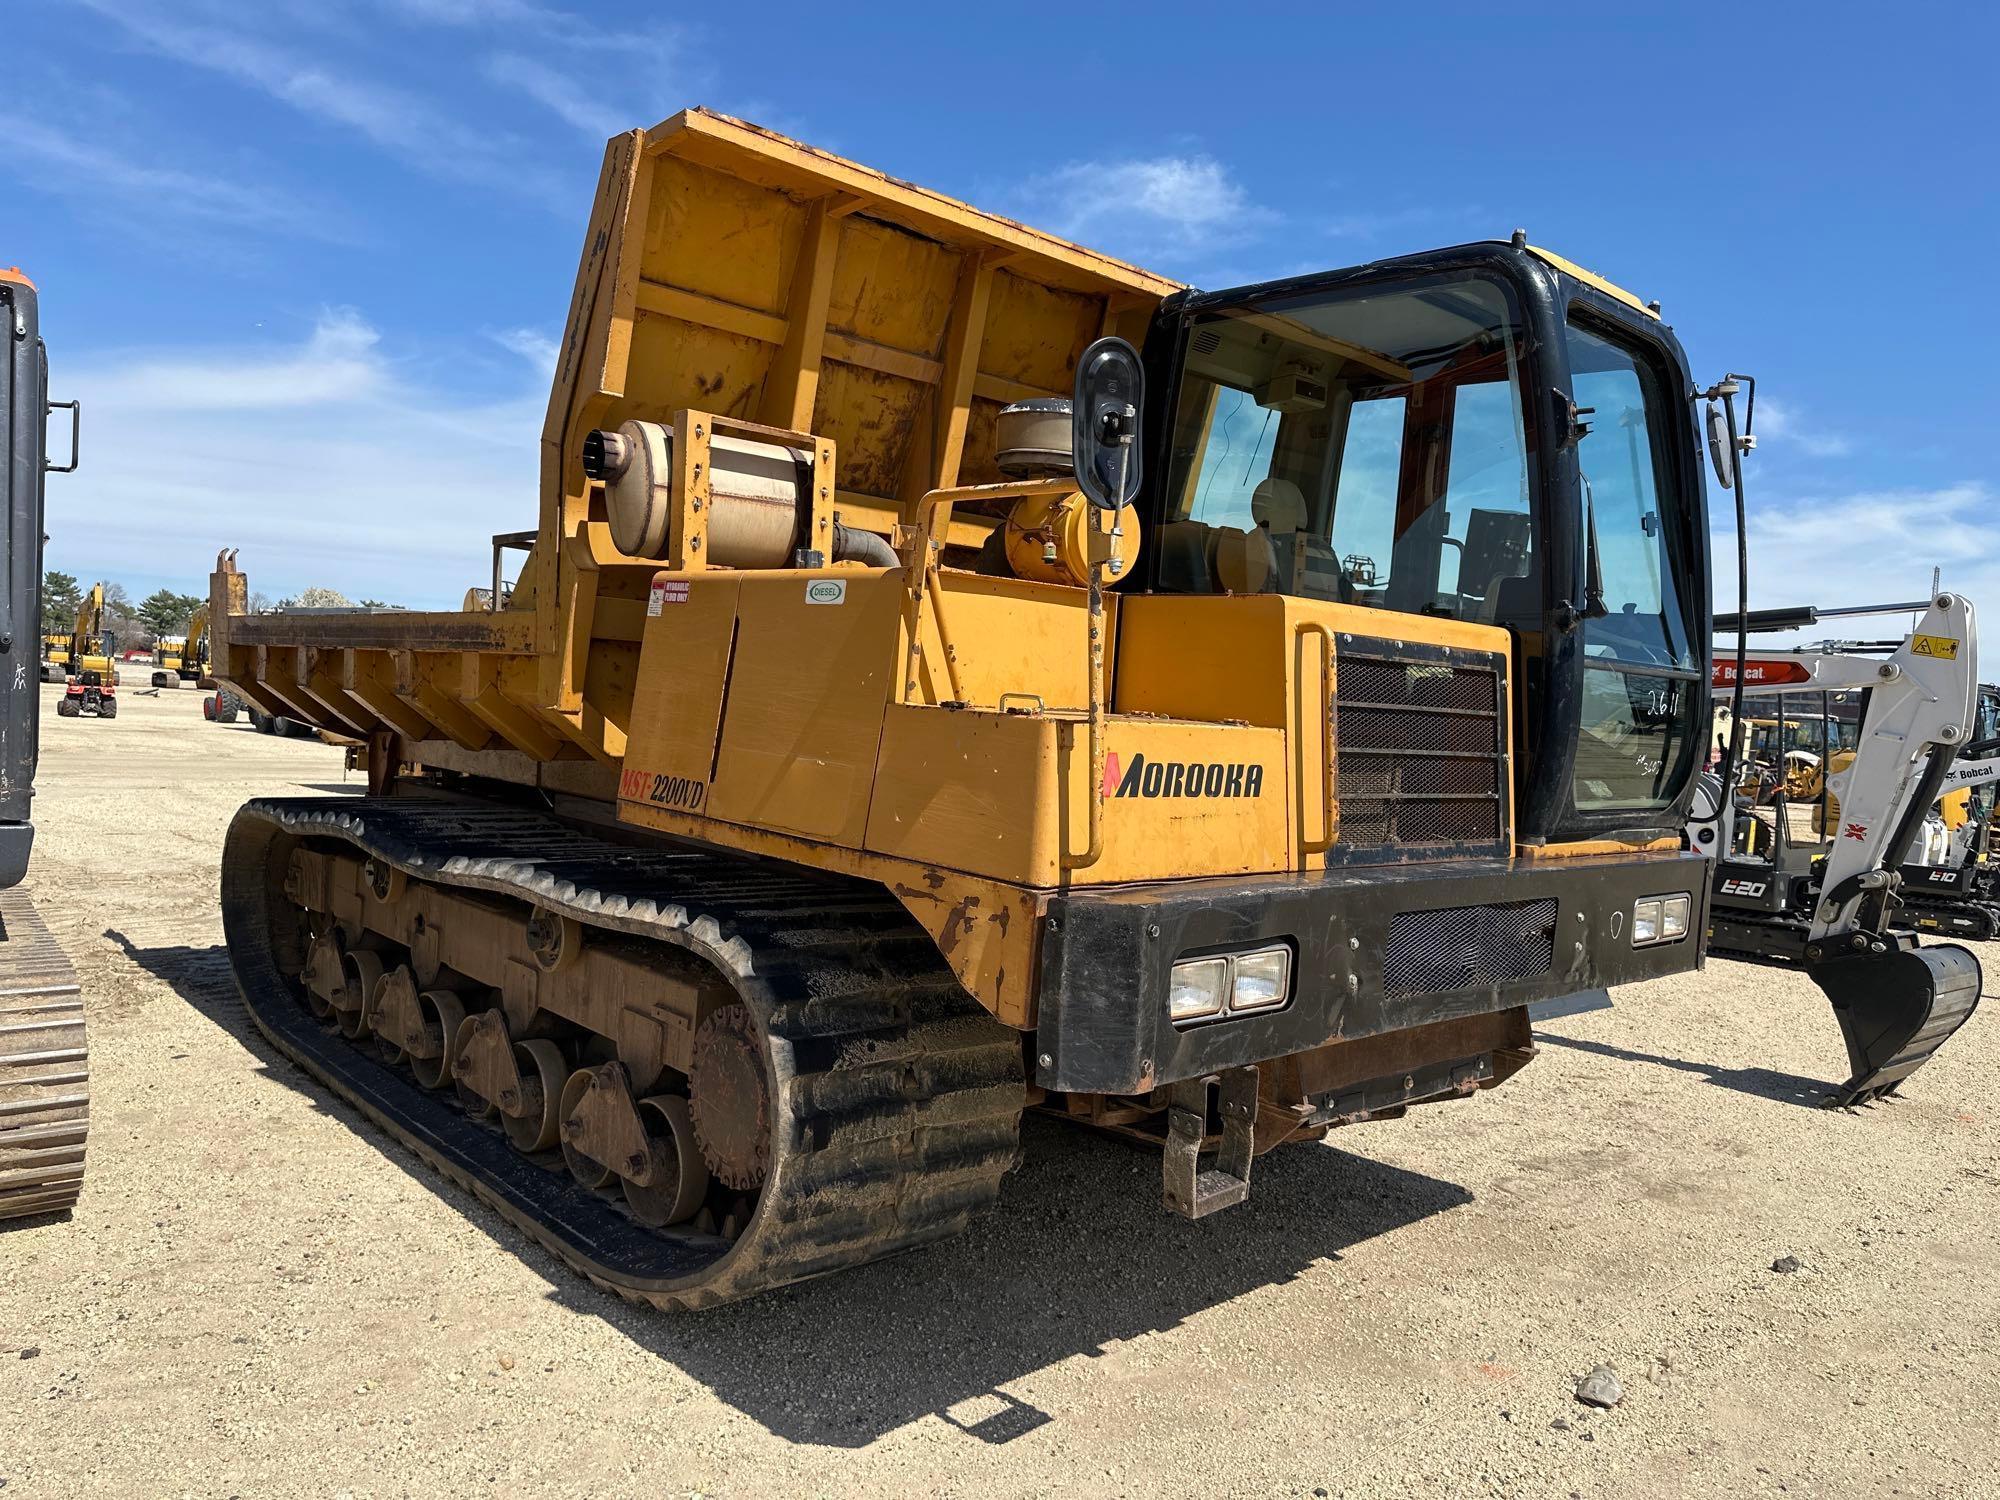 MOROOKA MST2200VD CRAWLER CARRIER SN:223607 powered by diesel engine, equipped with EROPS, air,